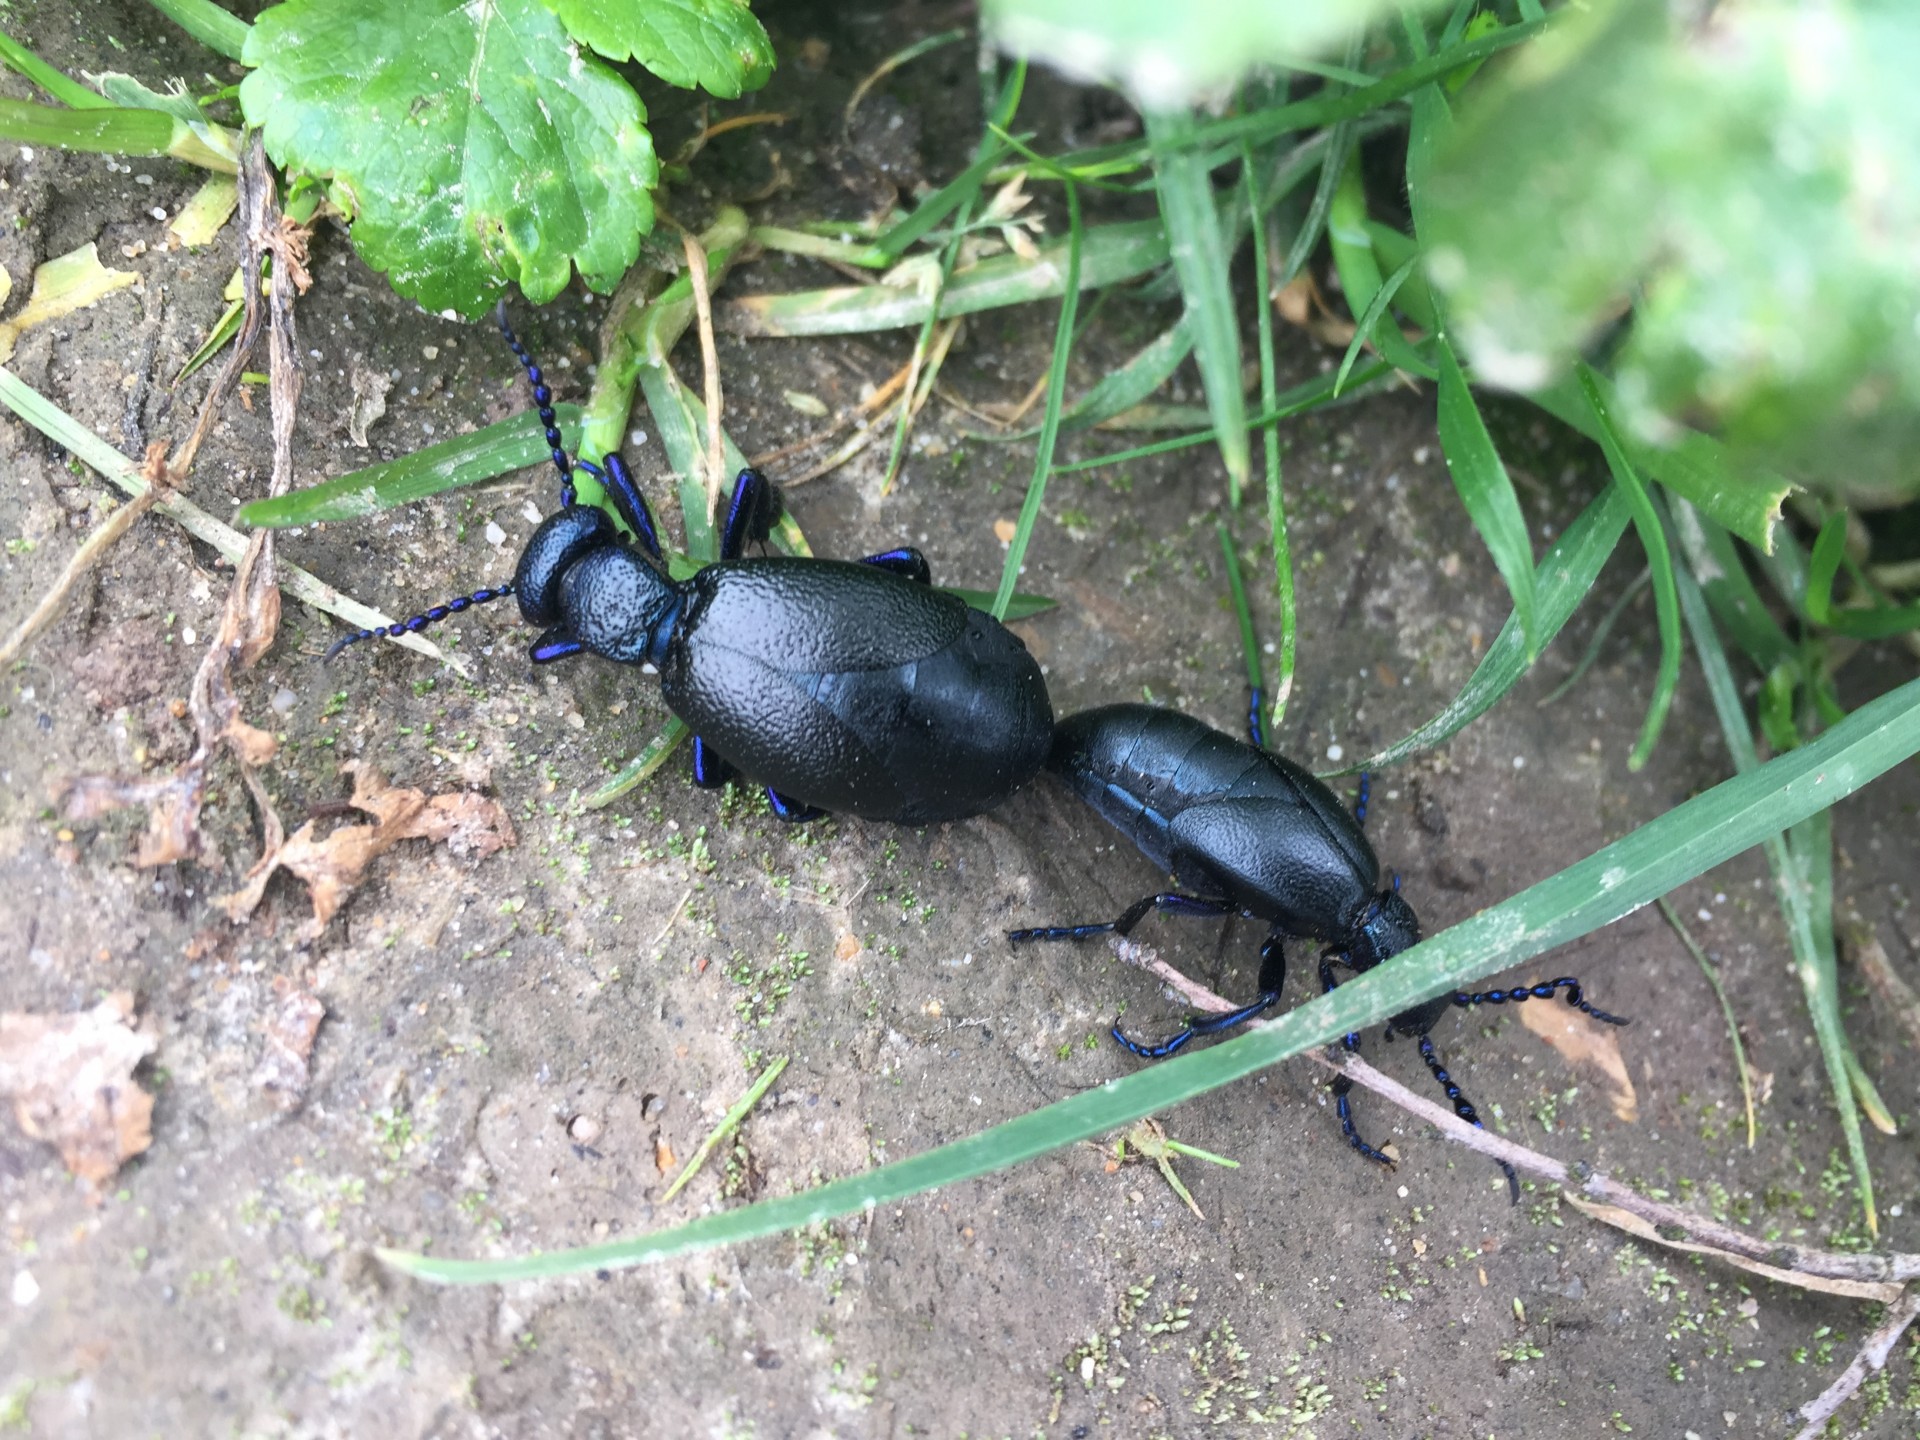 Oil beetles breeding; promoting healthy populations of local insects.